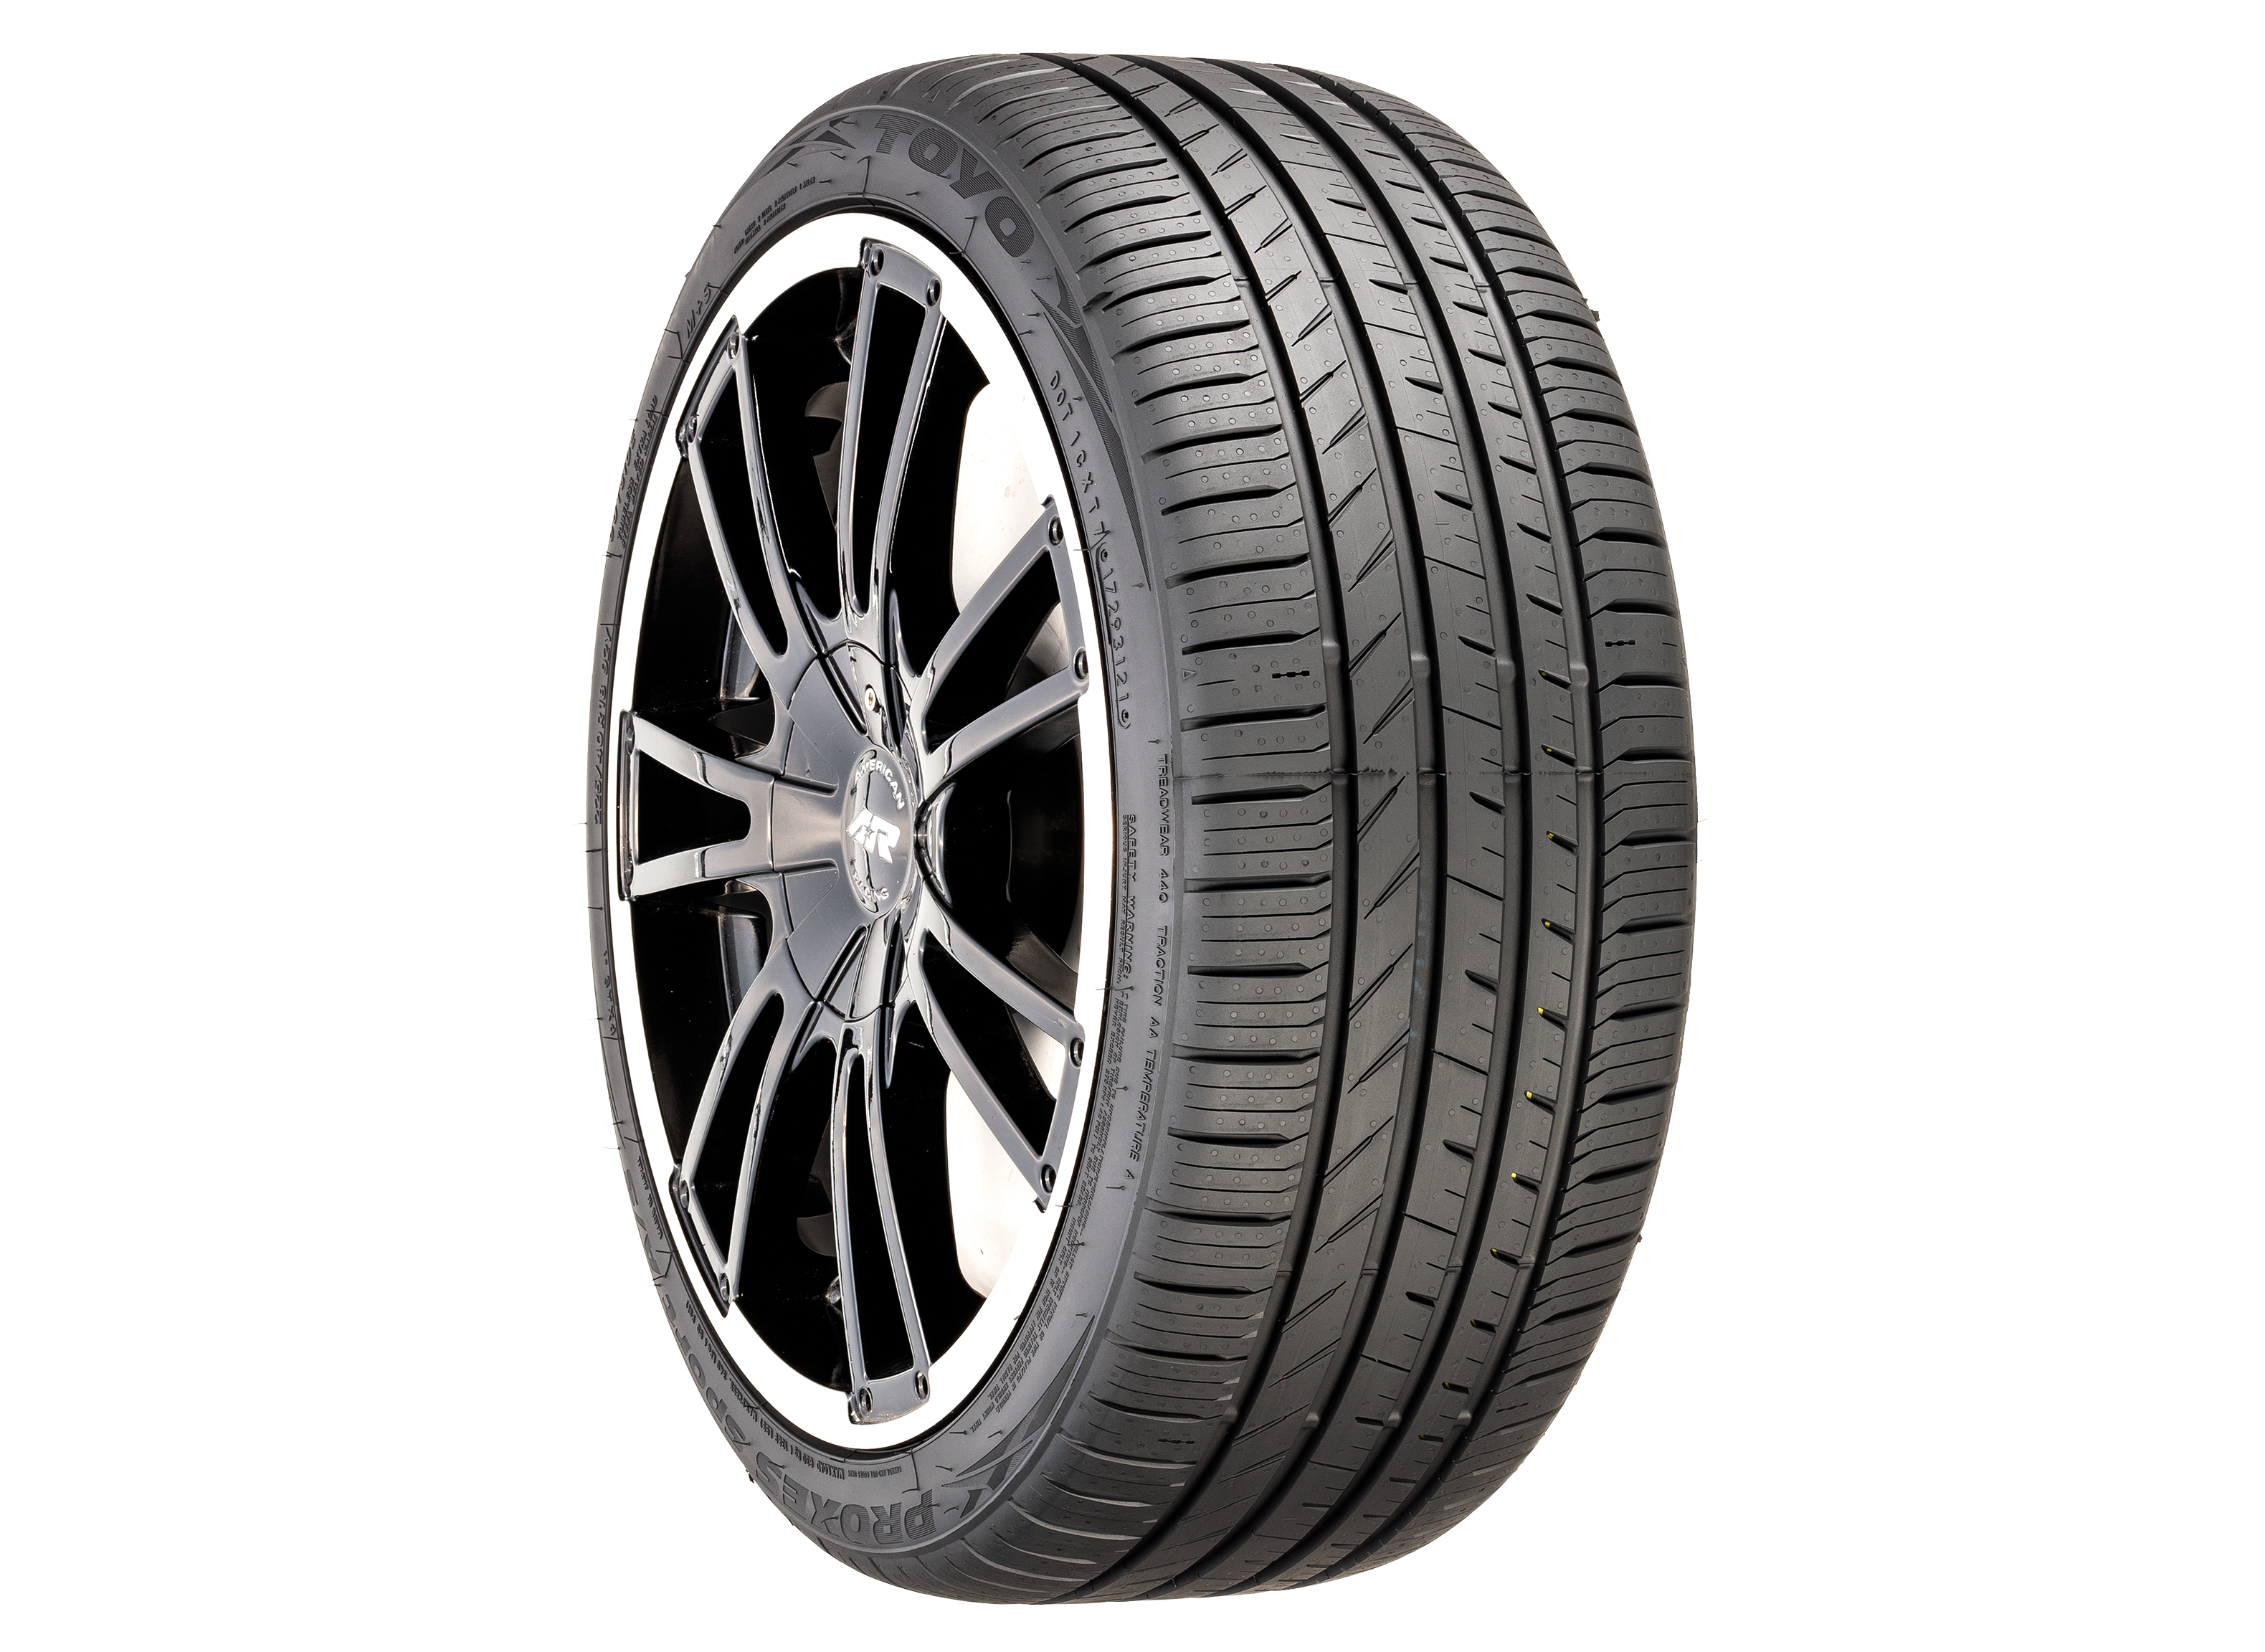 Toyo Proxes Sport A/S Tire Review - Consumer Reports